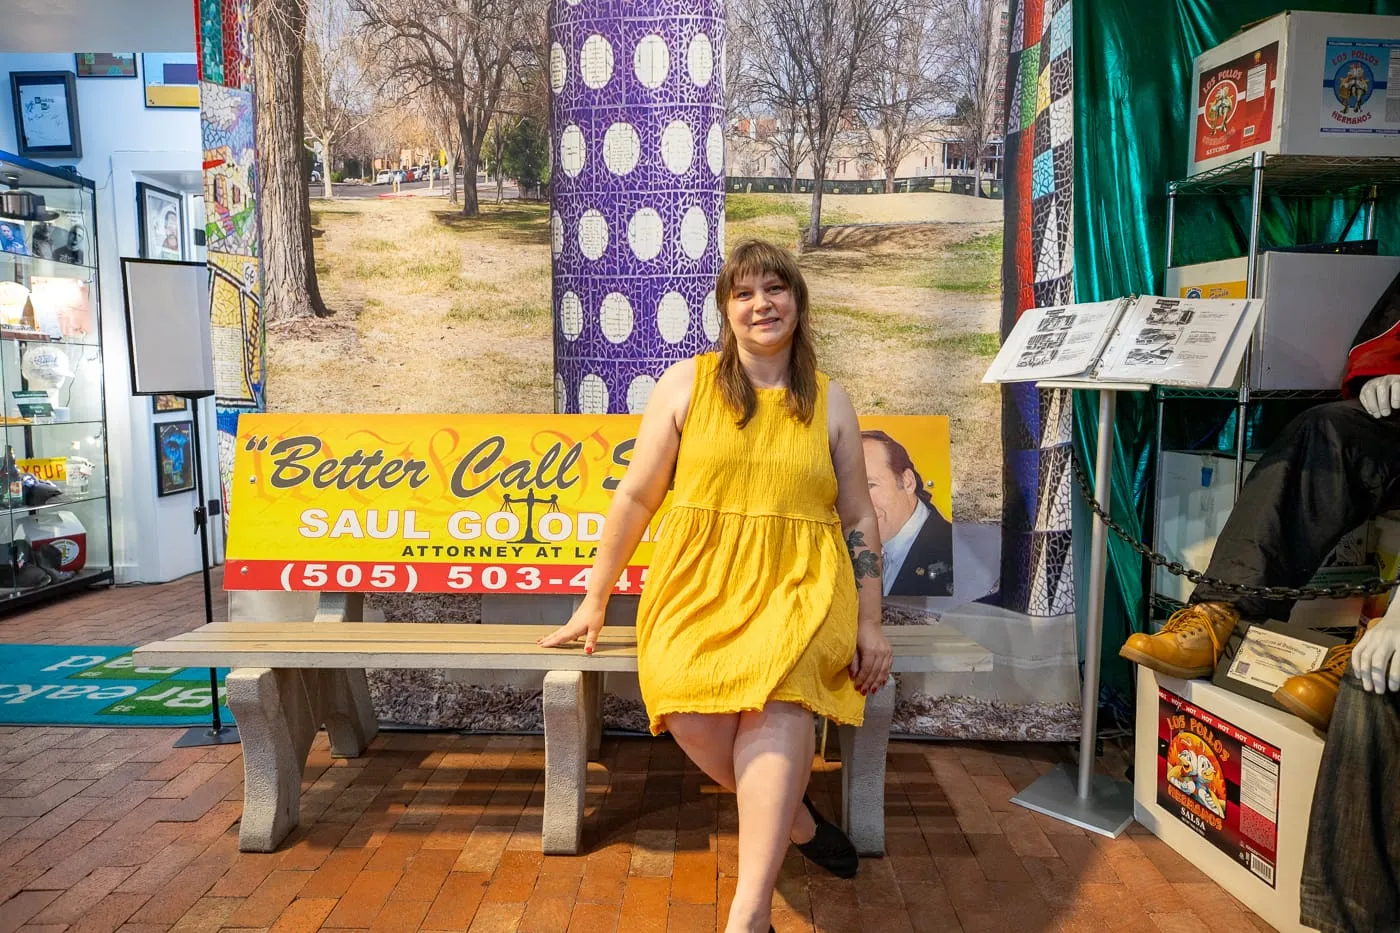 Better Call Saul Bench photo op at the Breaking Bad Store & Museum in Albuquerque, New Mexico